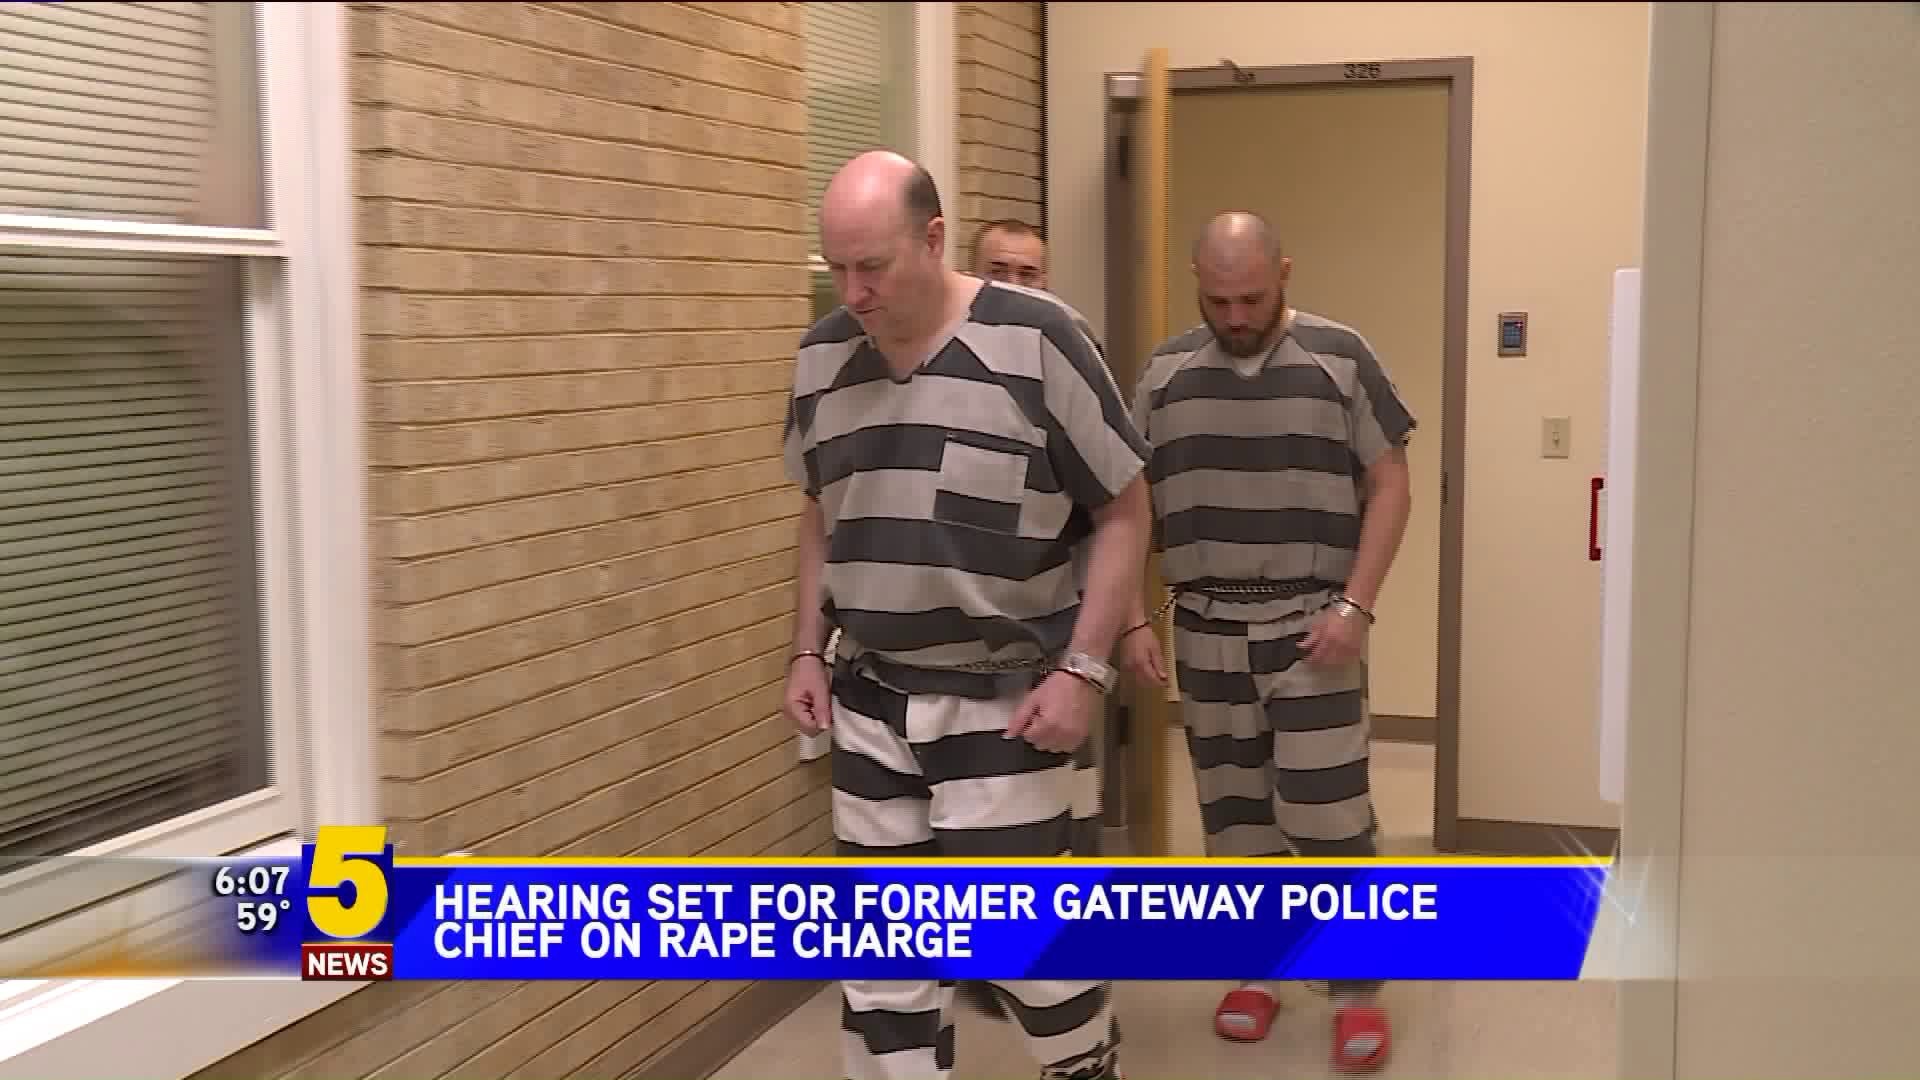 Hearing Set For Former Gateway Police Chief On Rape Charge